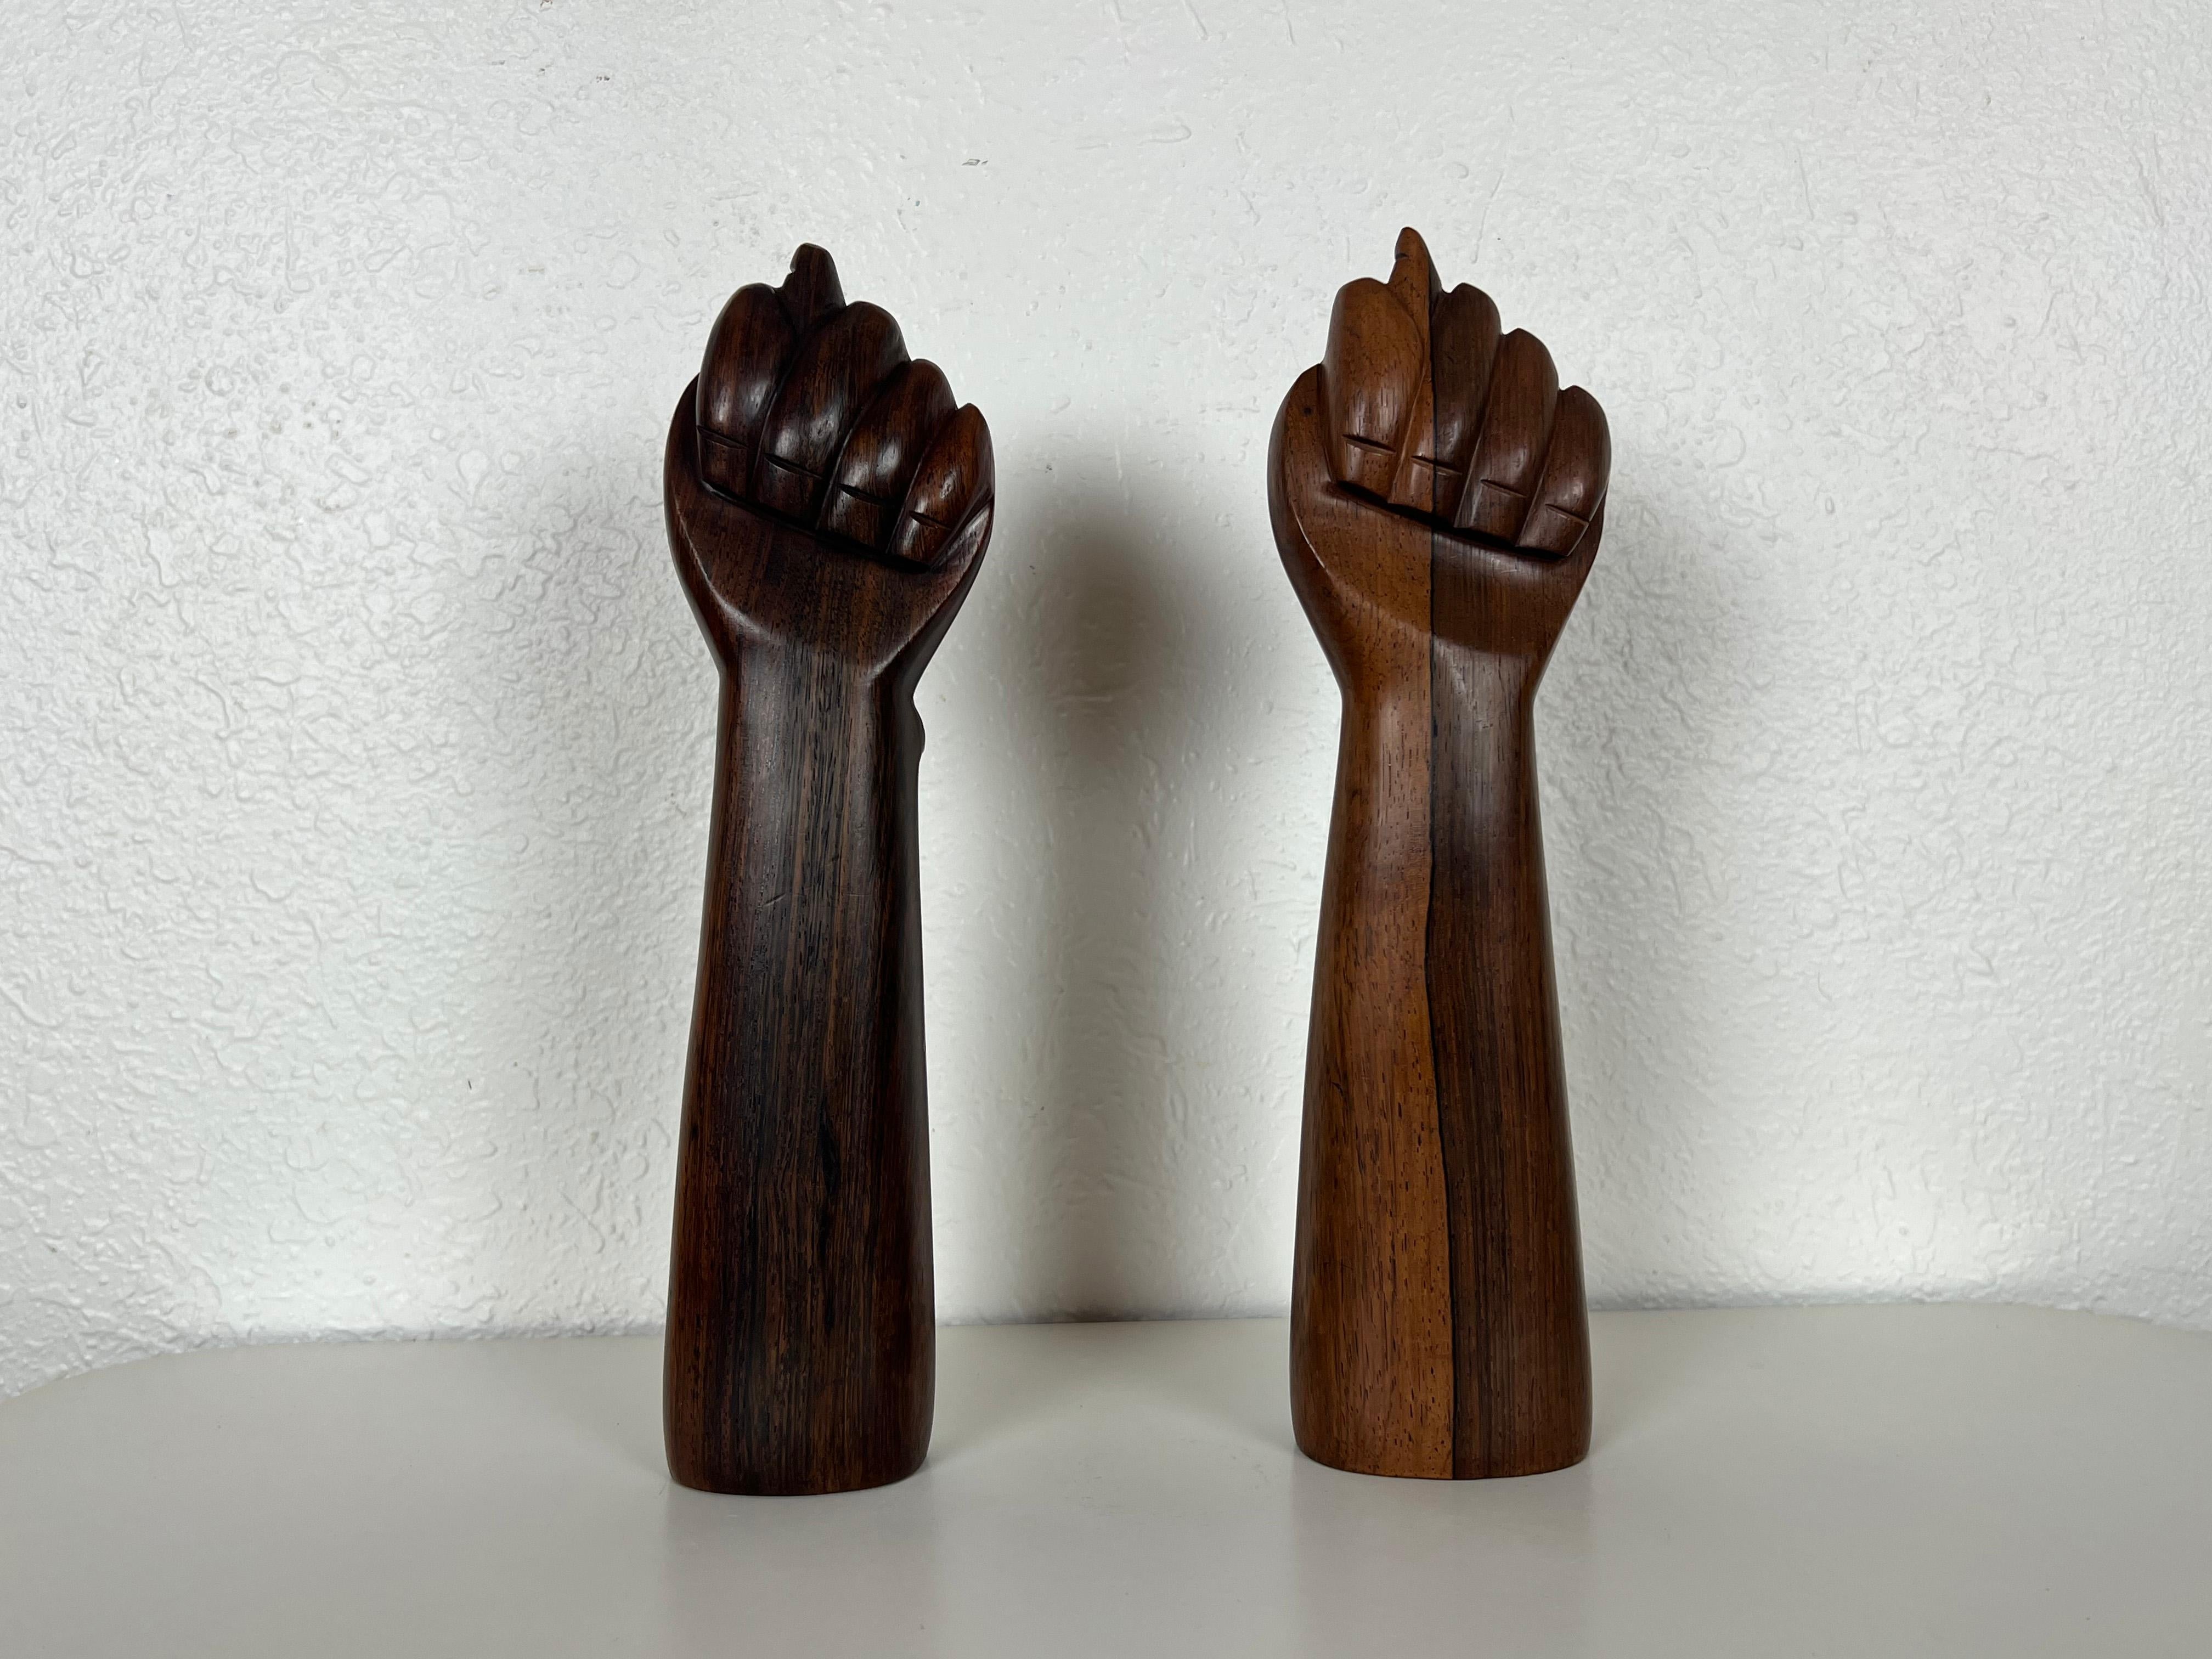 Vintage pair of hand sculptures crafted in solid Jacaranda Rosewood made in Brazil by Jac Arte. Original labels present on both pieces. 

Maker: Jac Arte

Origin: Brazil

Year: 1960s

Style: Mid-Century Modern / Brazilian